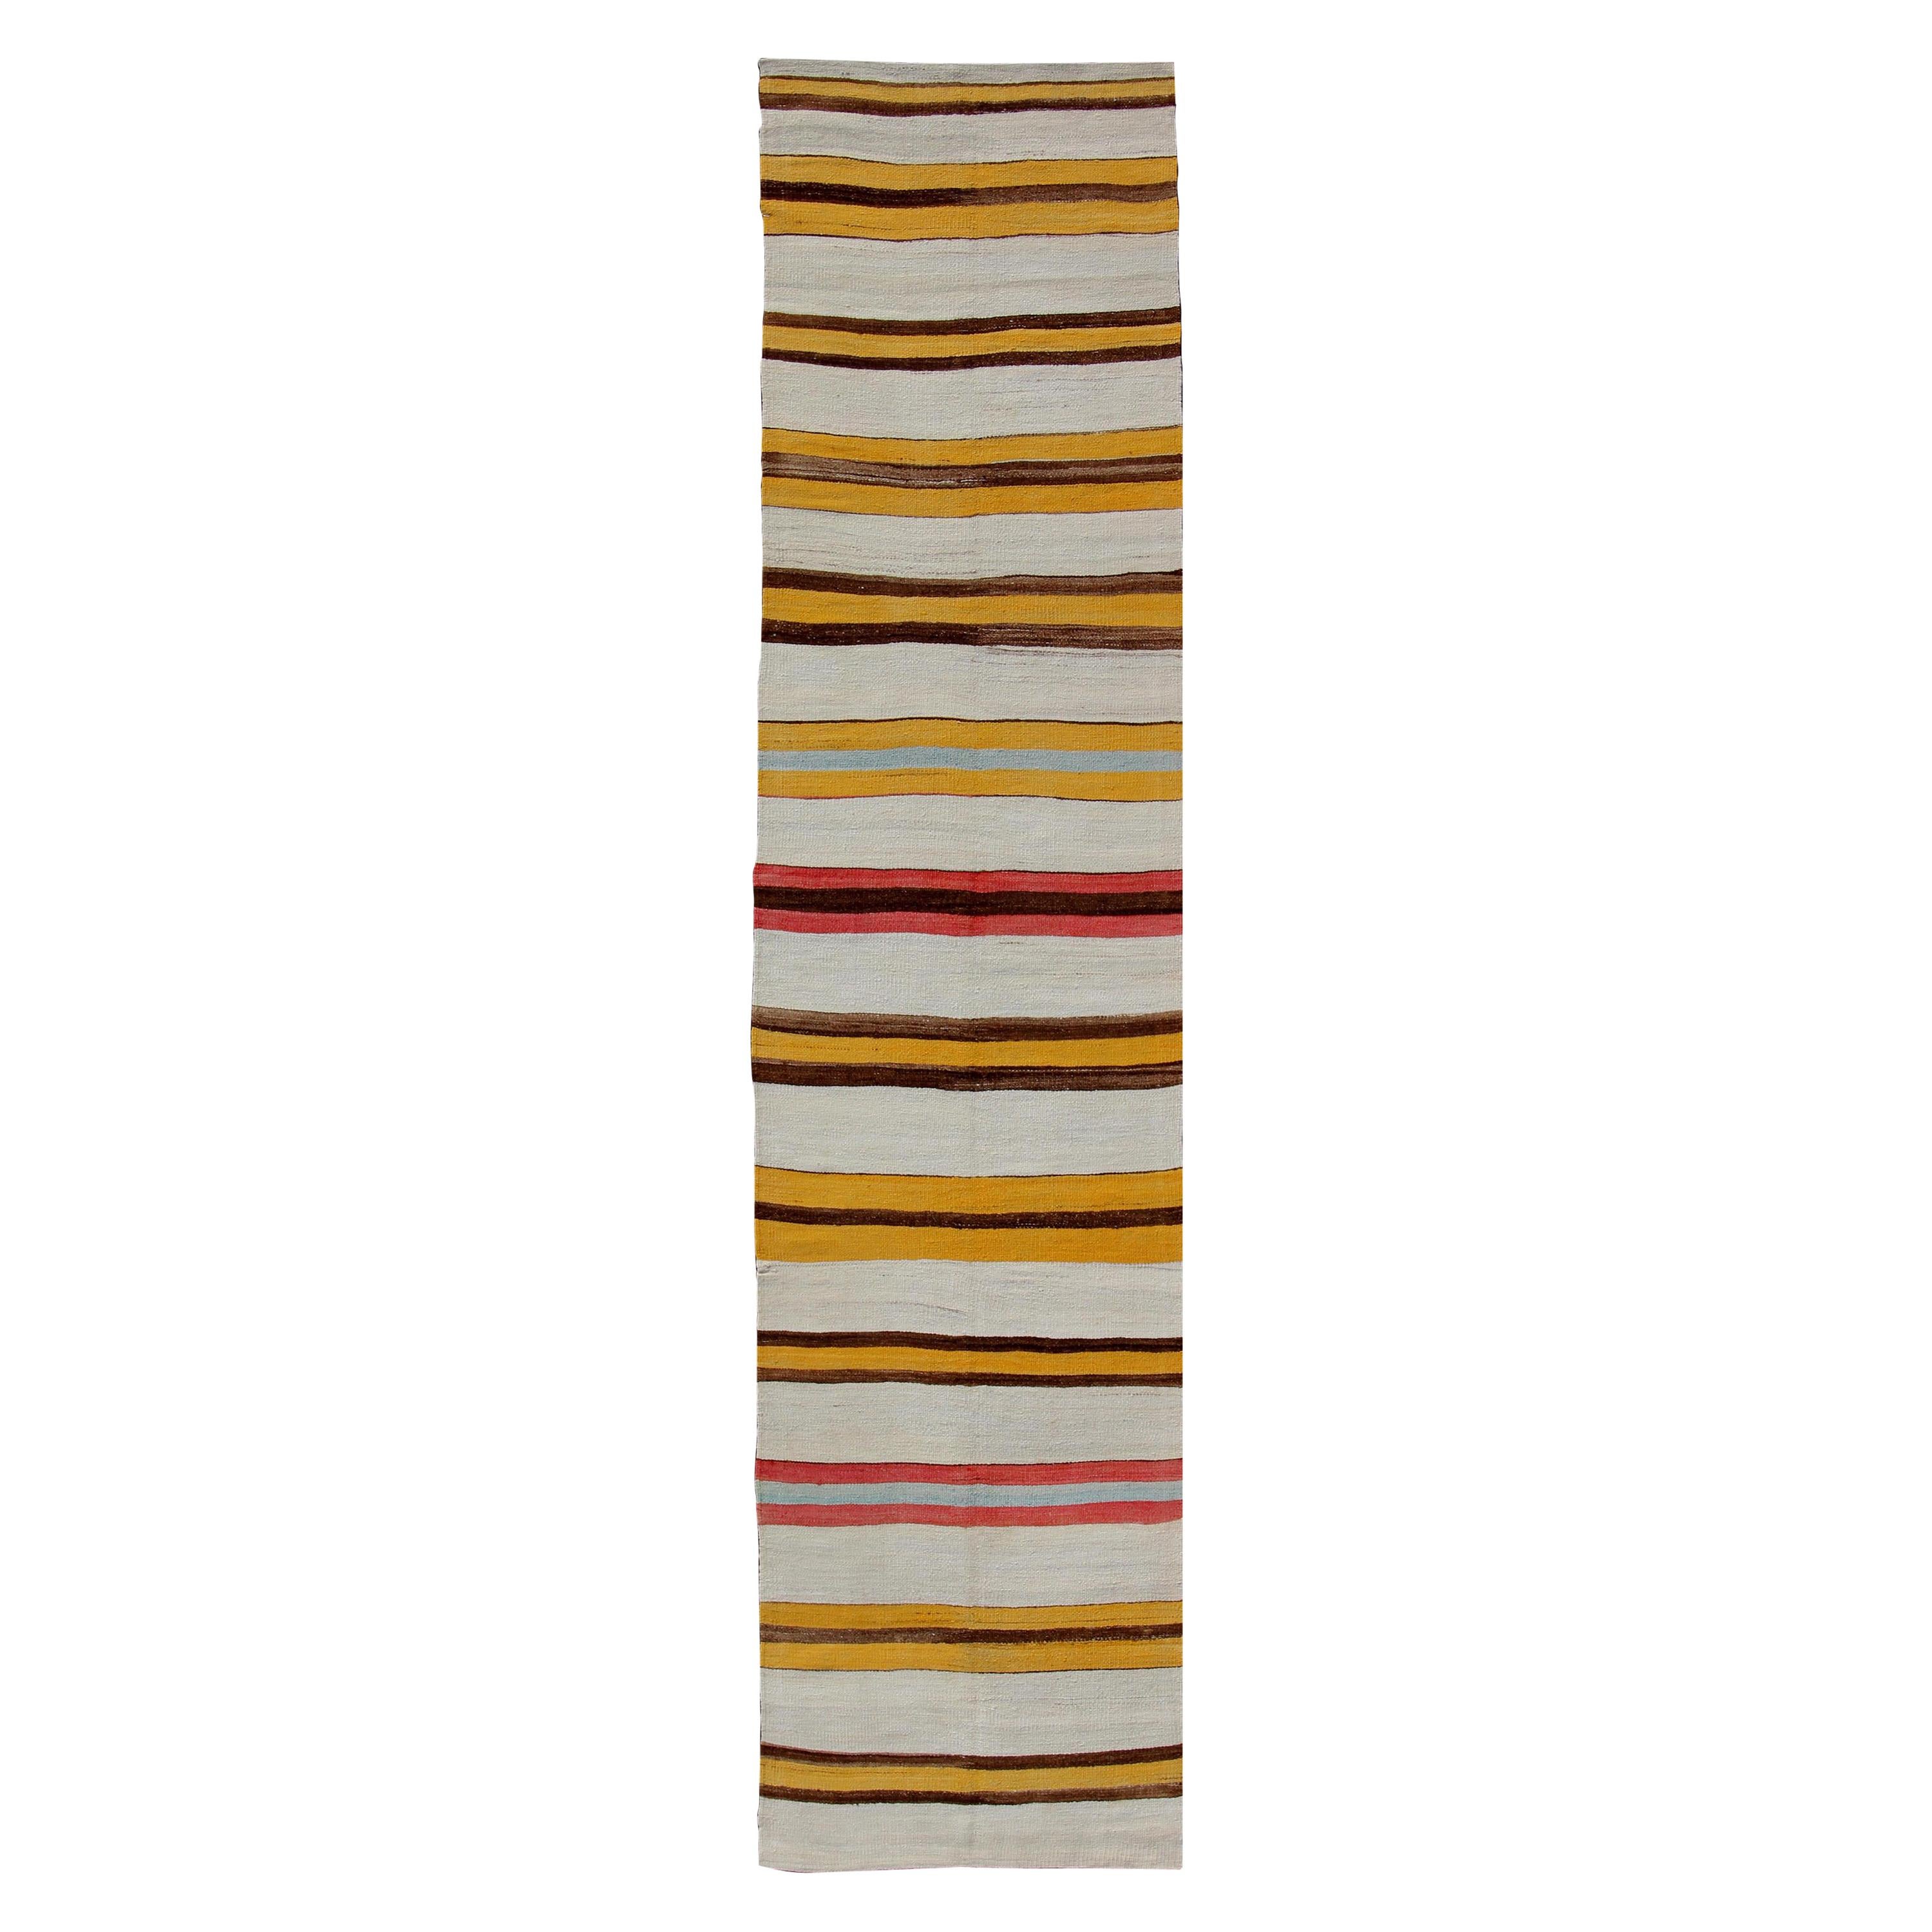  Vintage Colorful Kilim Runner With Stripe Design in Yellow, Ivory, Red & Brown  For Sale